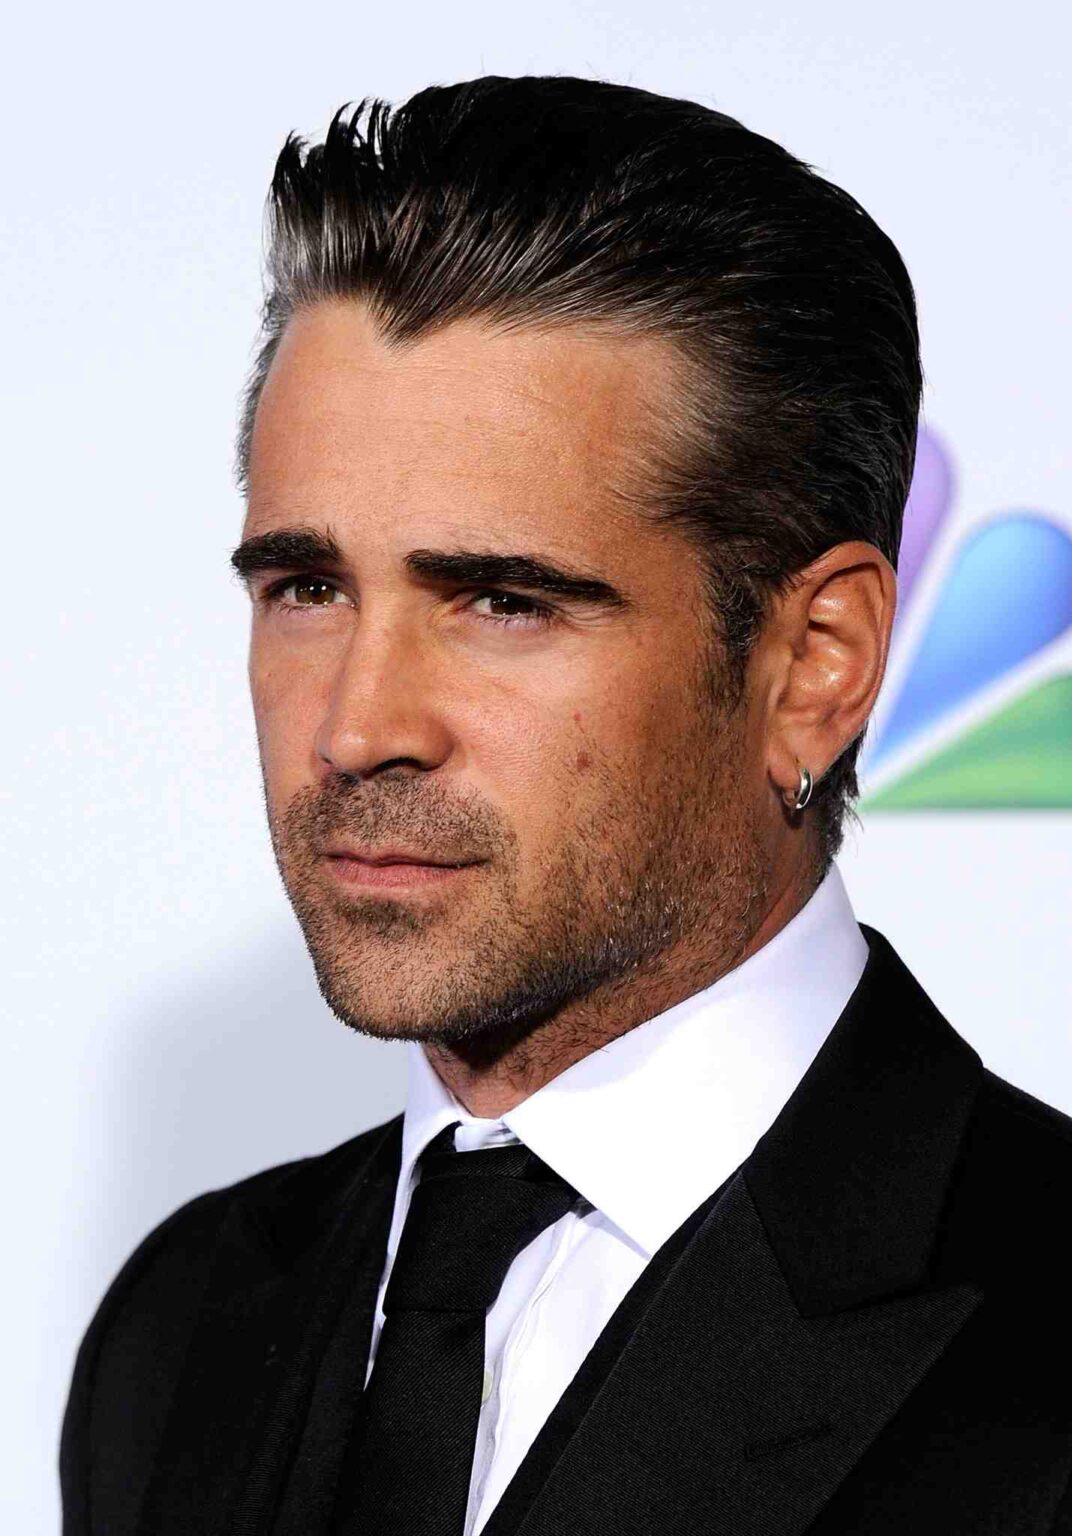 Can't get enough of the Irish charm? Discover if there's a Colin Farrell nude scene in 'Sugar' and immerse yourself in his raw acting prowess instead. Buzzing to know more? Click!